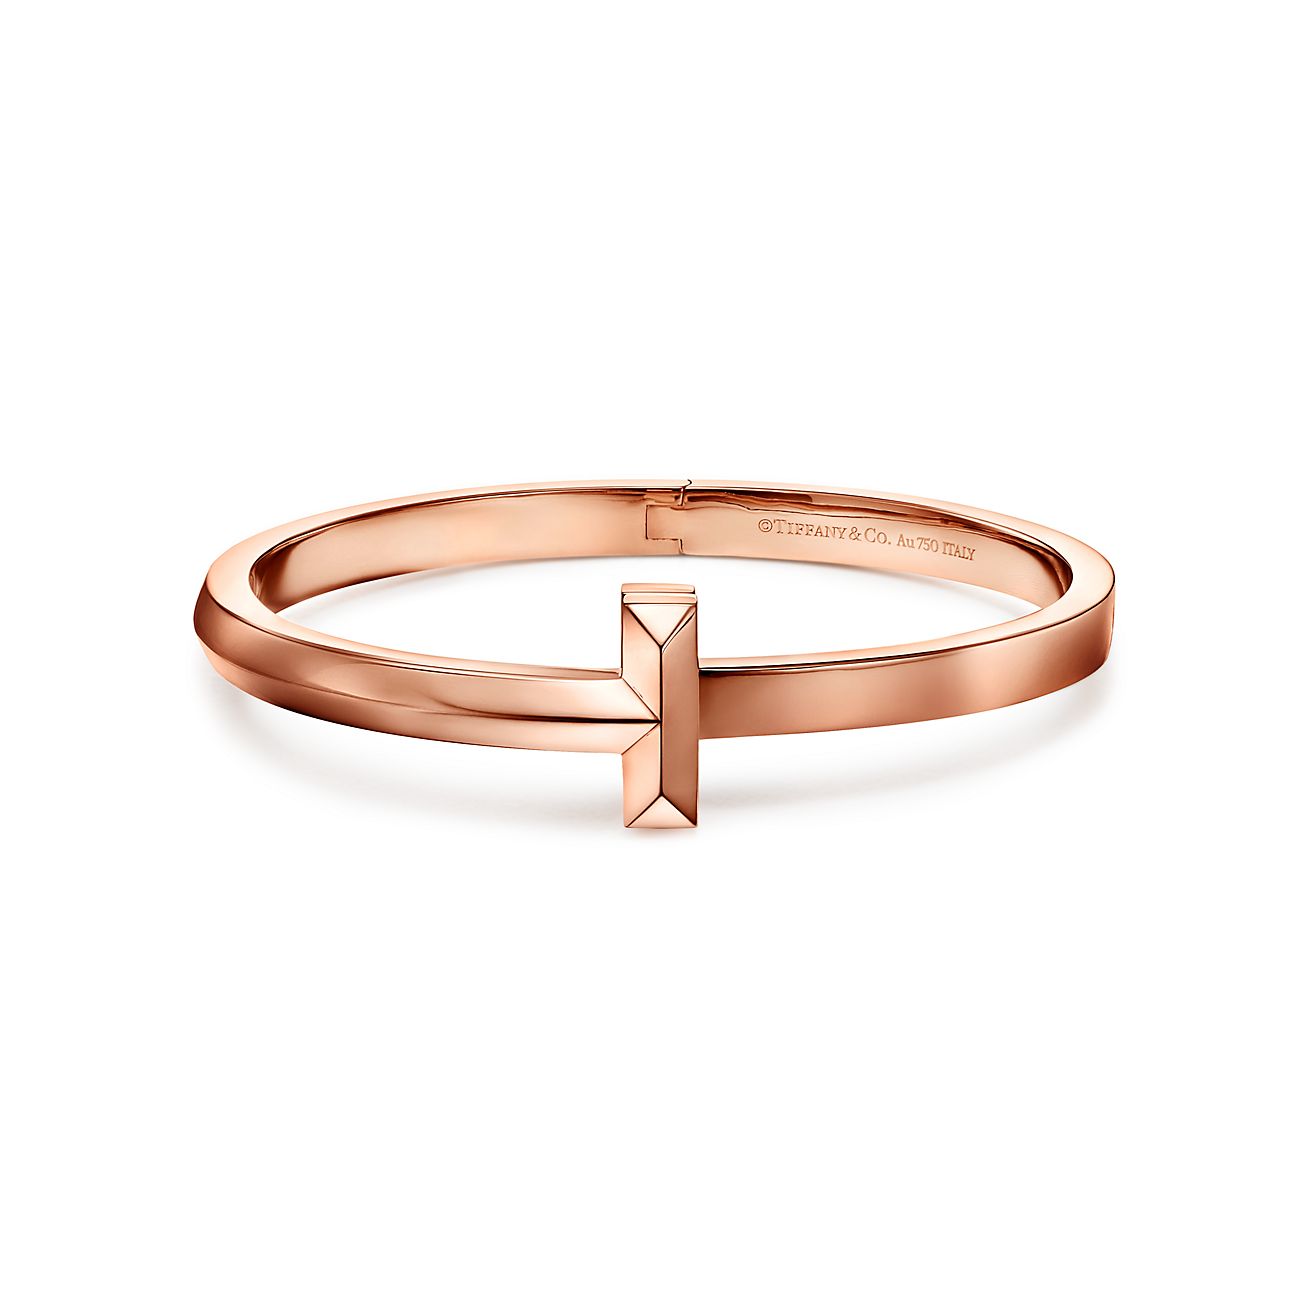 T1 wide hinged bangle in 18k rose gold 